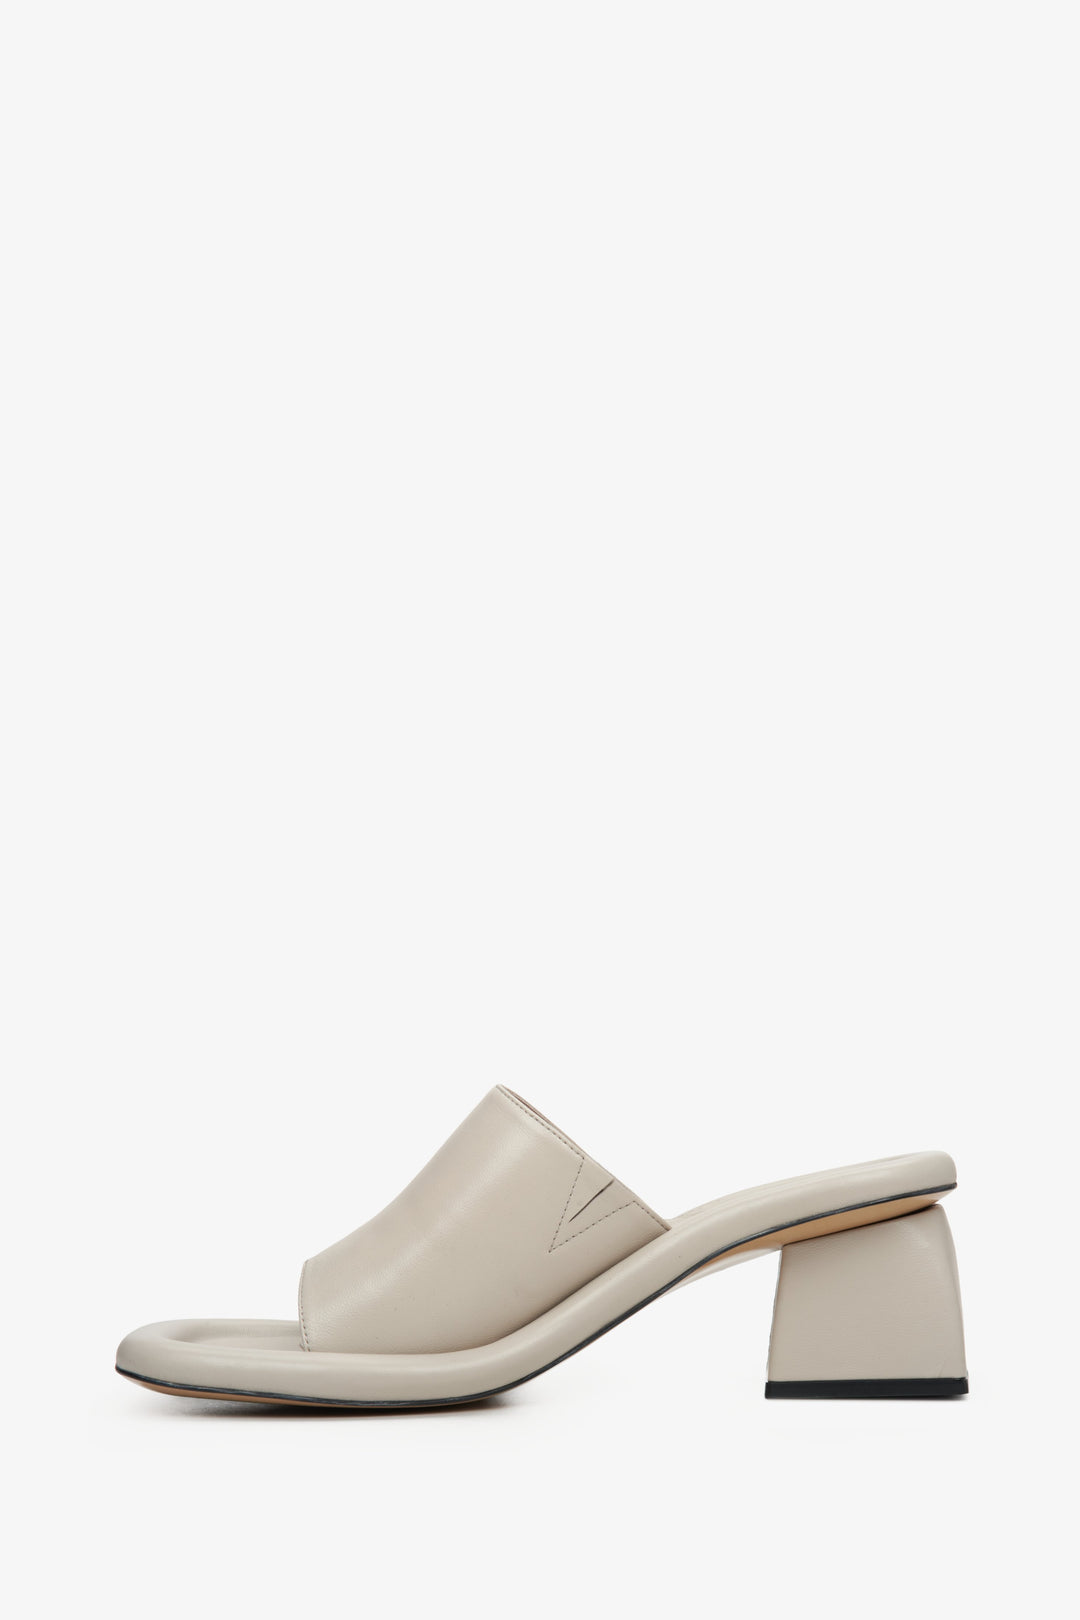 Stylish beige mules for women made of natural leather on a square heel - the profile of the shoes.